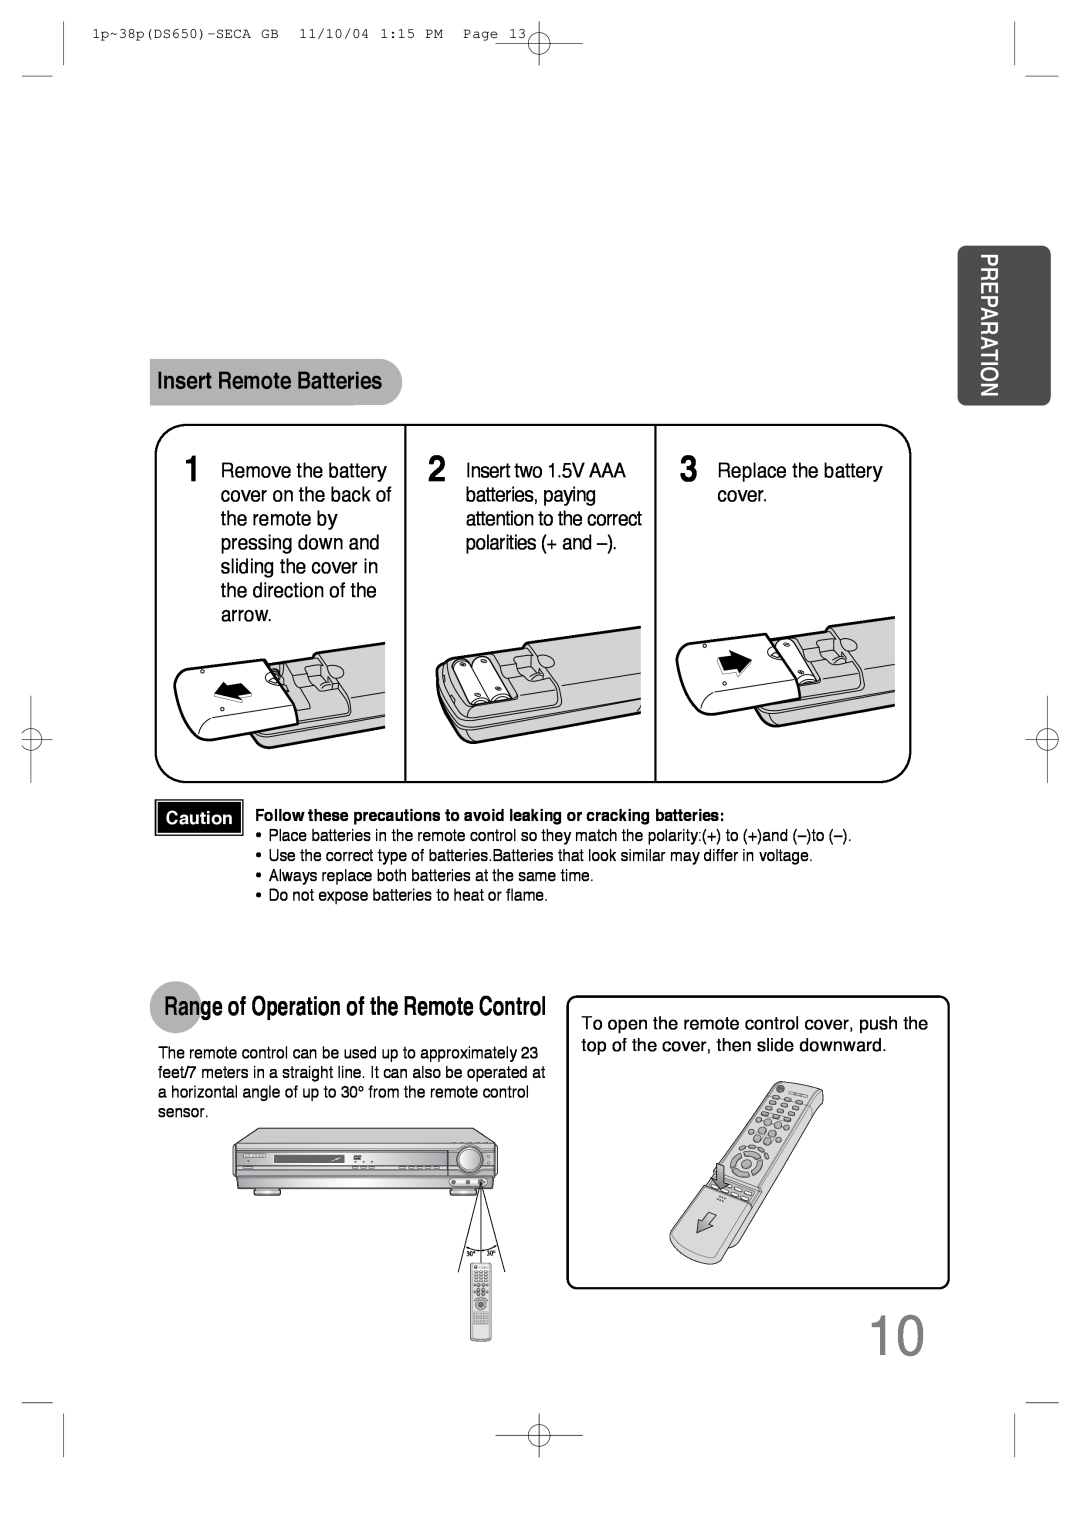 Samsung HT-DS650 instruction manual Insert Remote Batteries, Preparation, Range of Operation of the Remote Control 